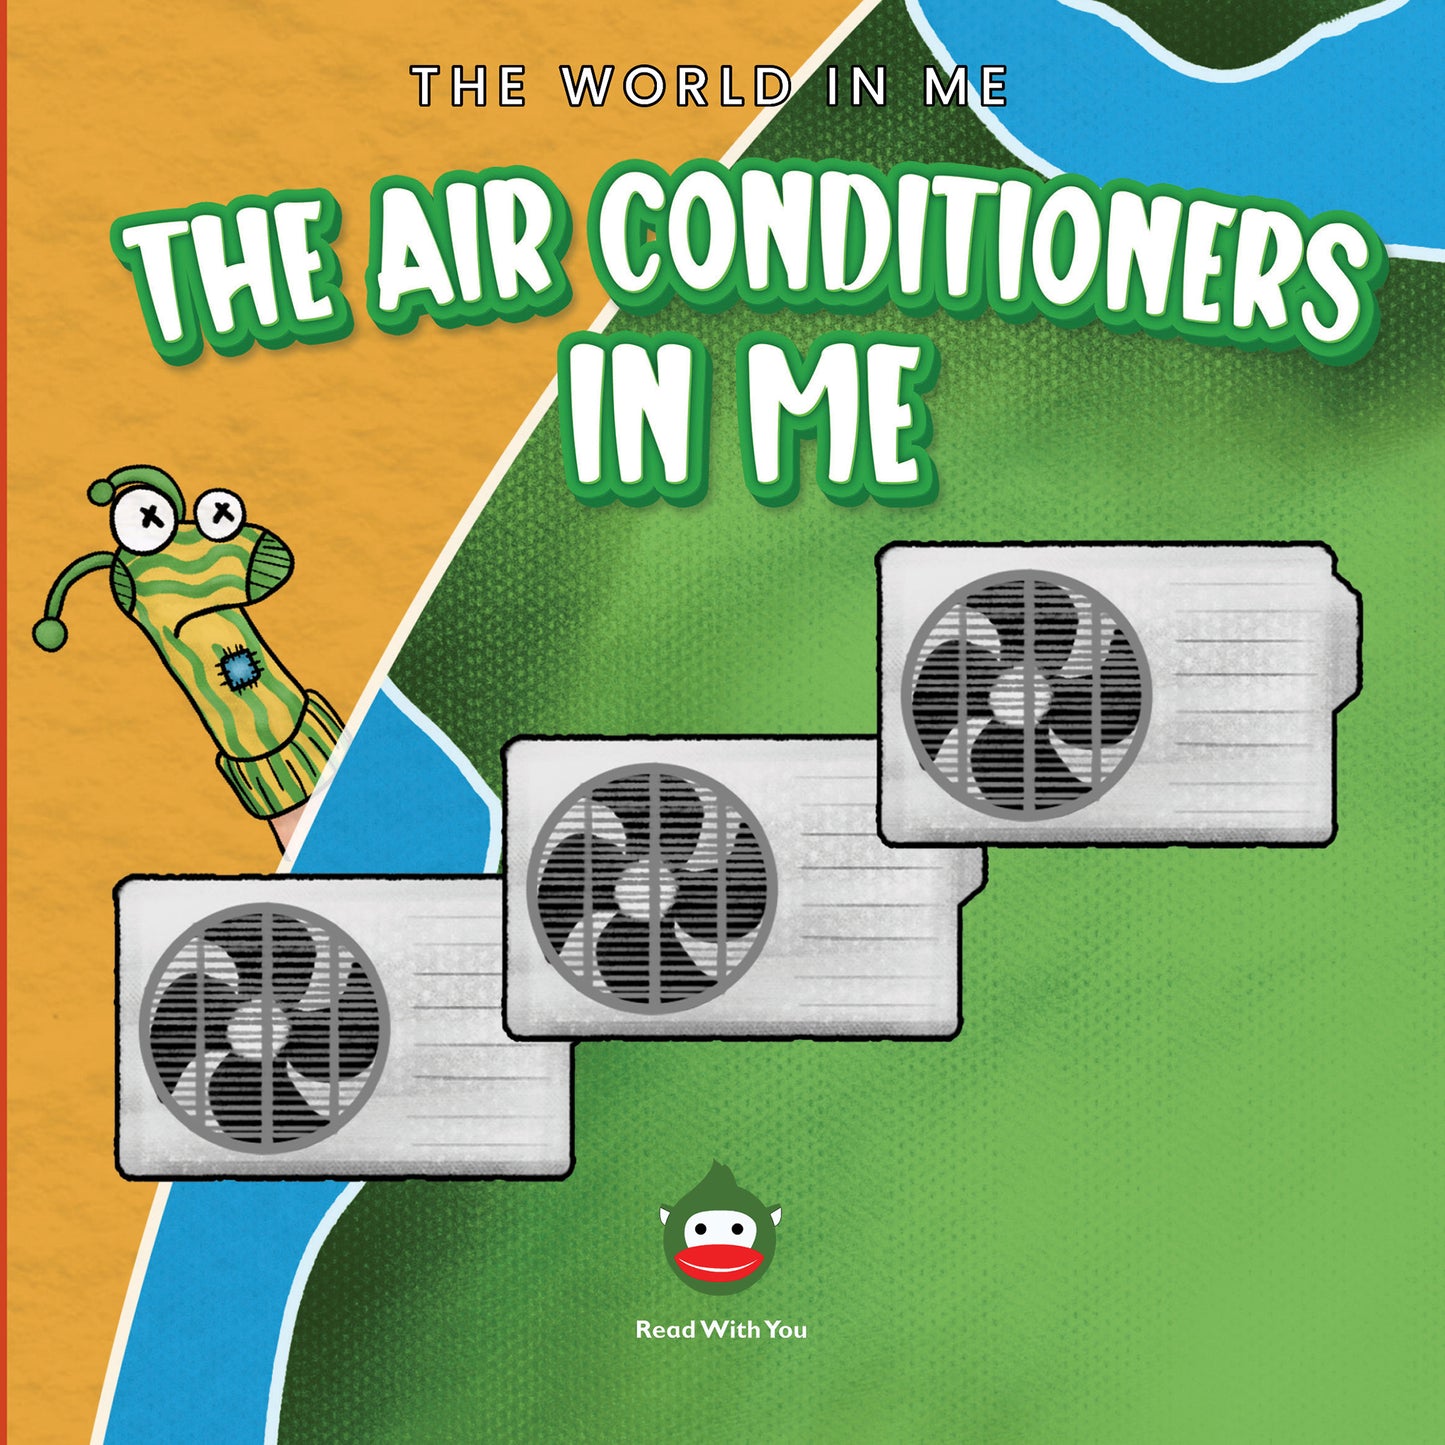 The Air Conditioners in Me